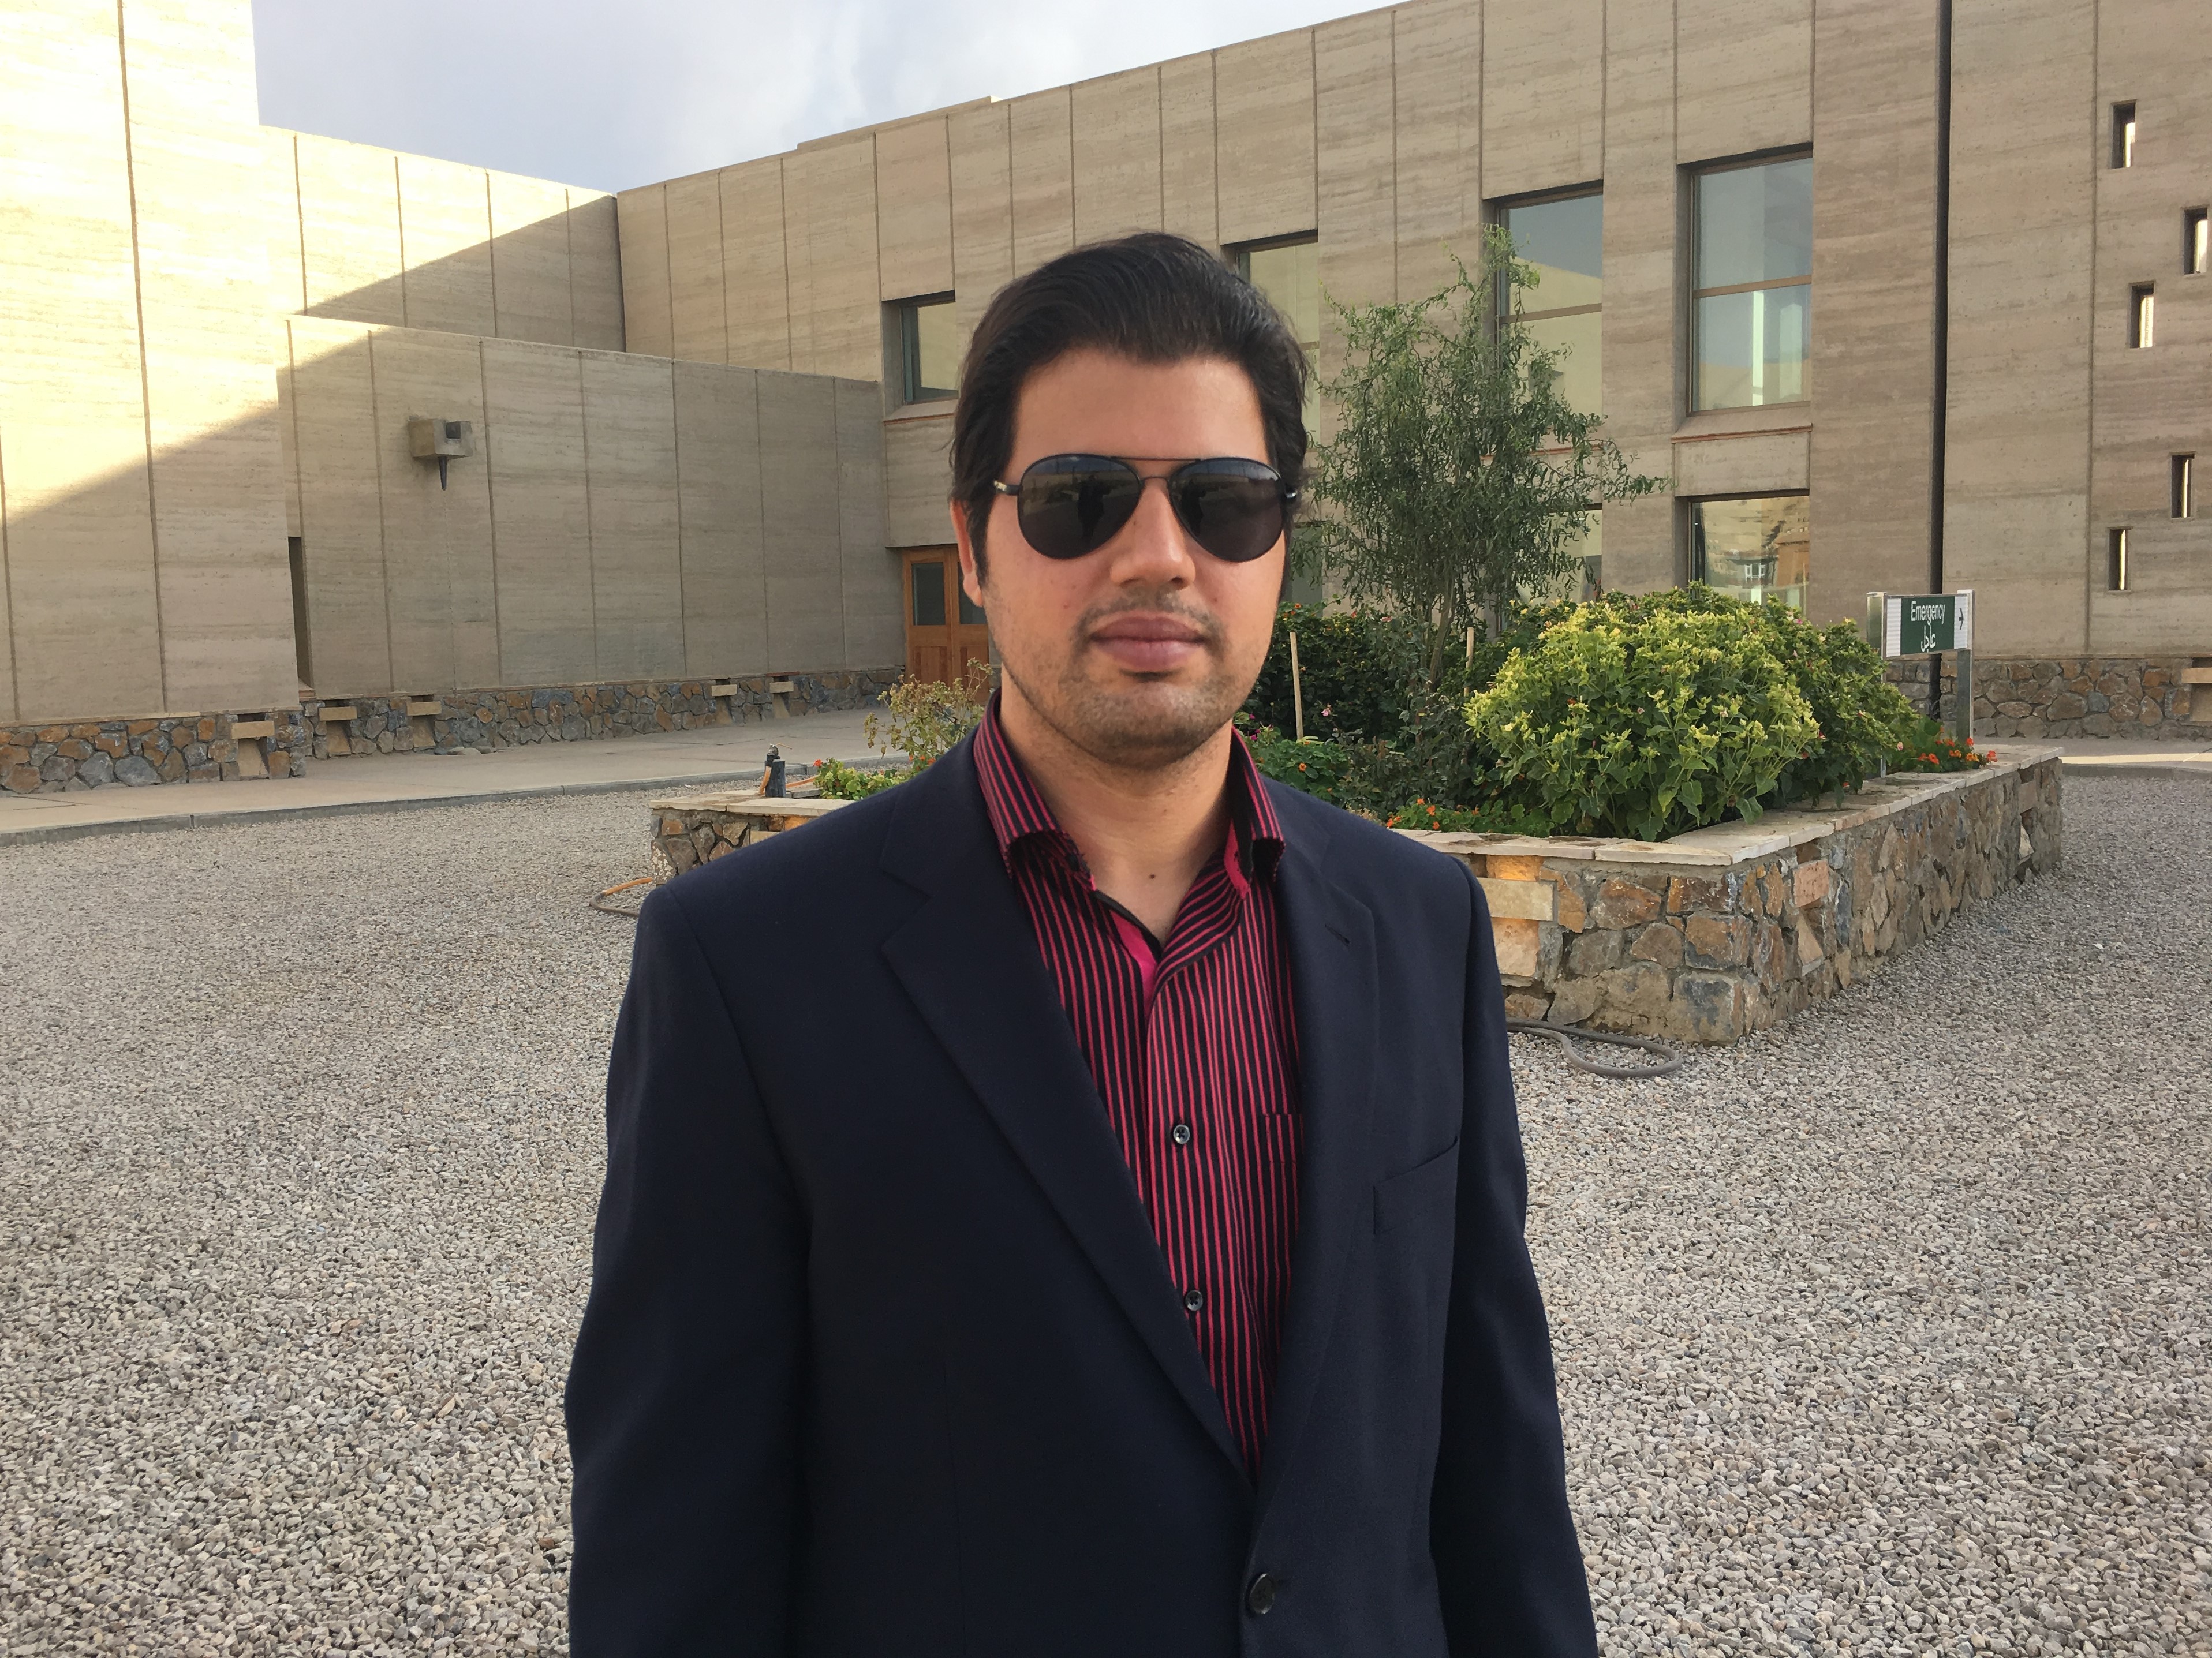 Fahim wearing a suit jacket, shirt and shades, stood in front of a flower bed.